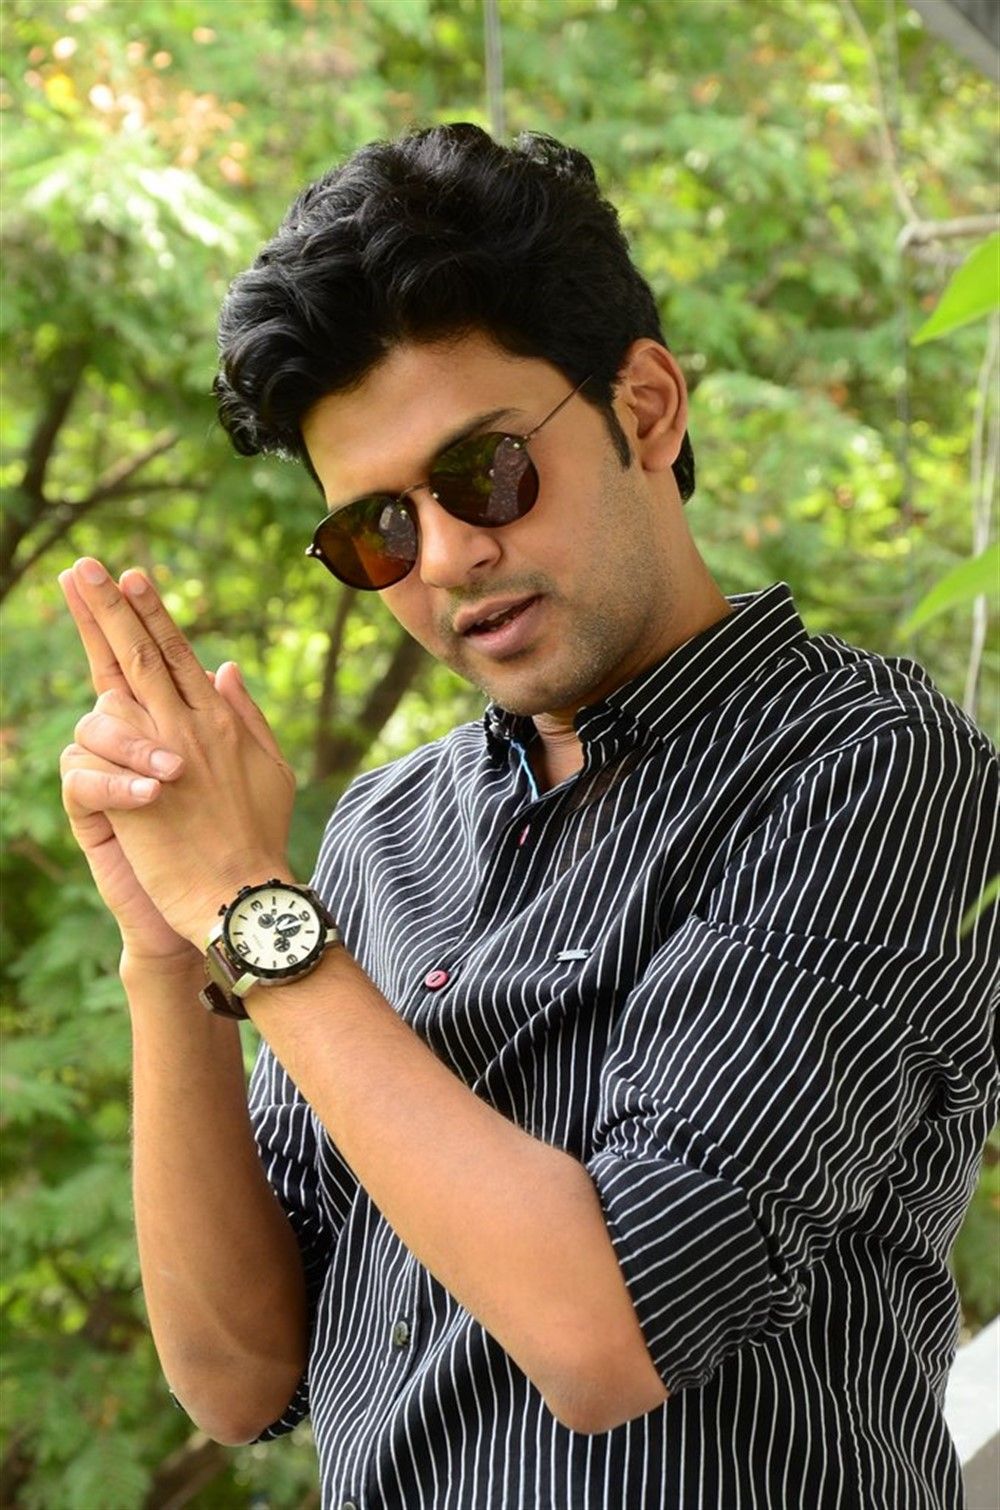 Naveen Polisetty Wiki, Age, Wife, Girlfriend, Bio, Parents, Movies, Image and More